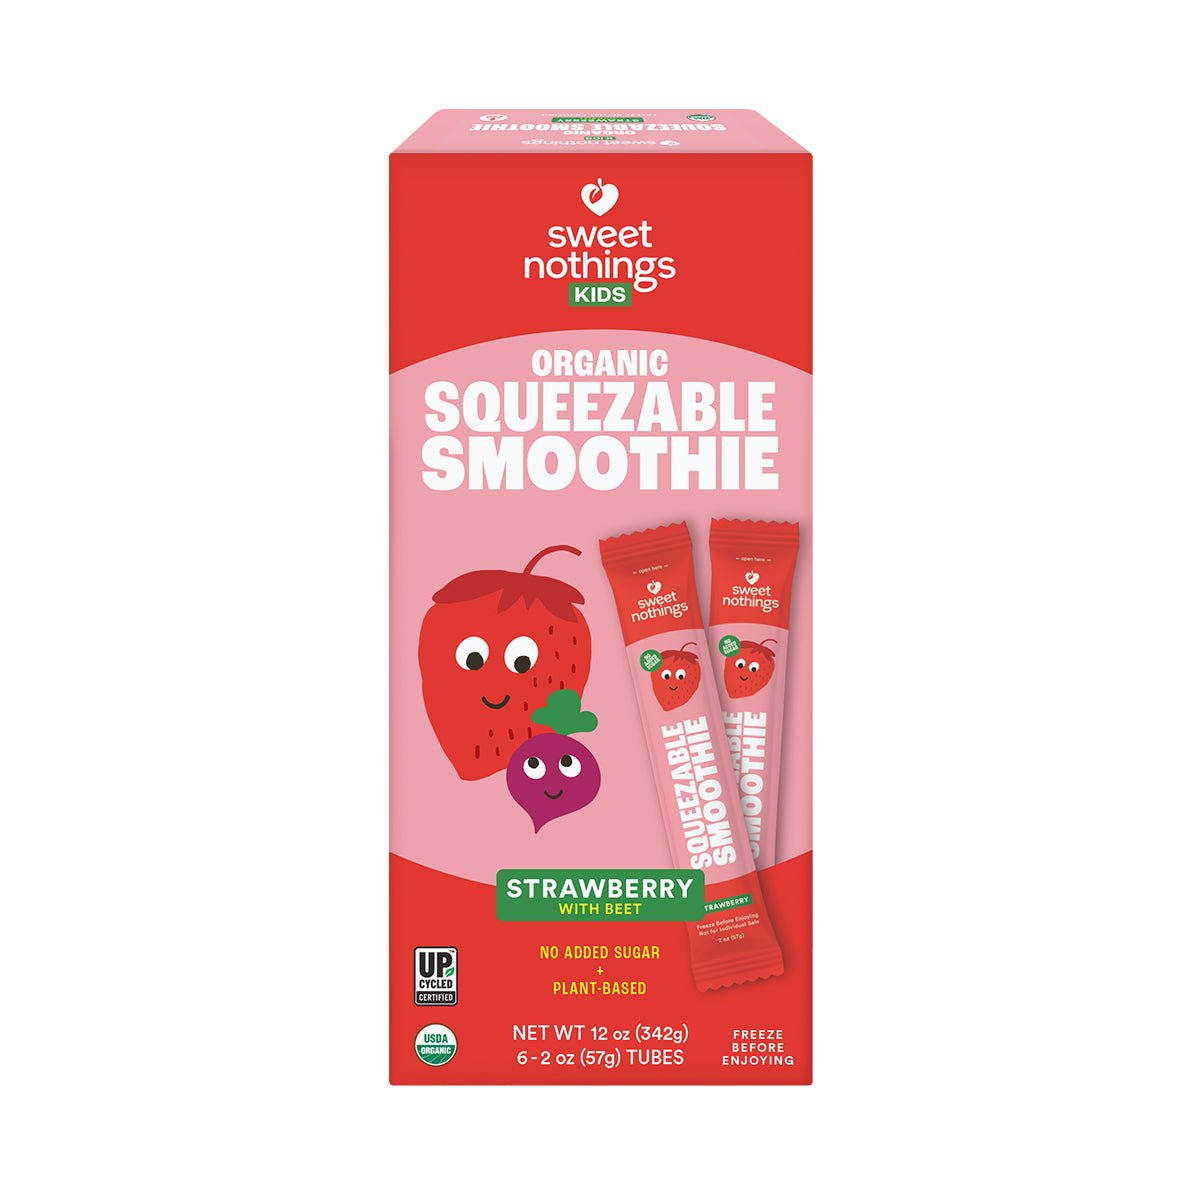 Strawberry Beet Squeezable Smoothie